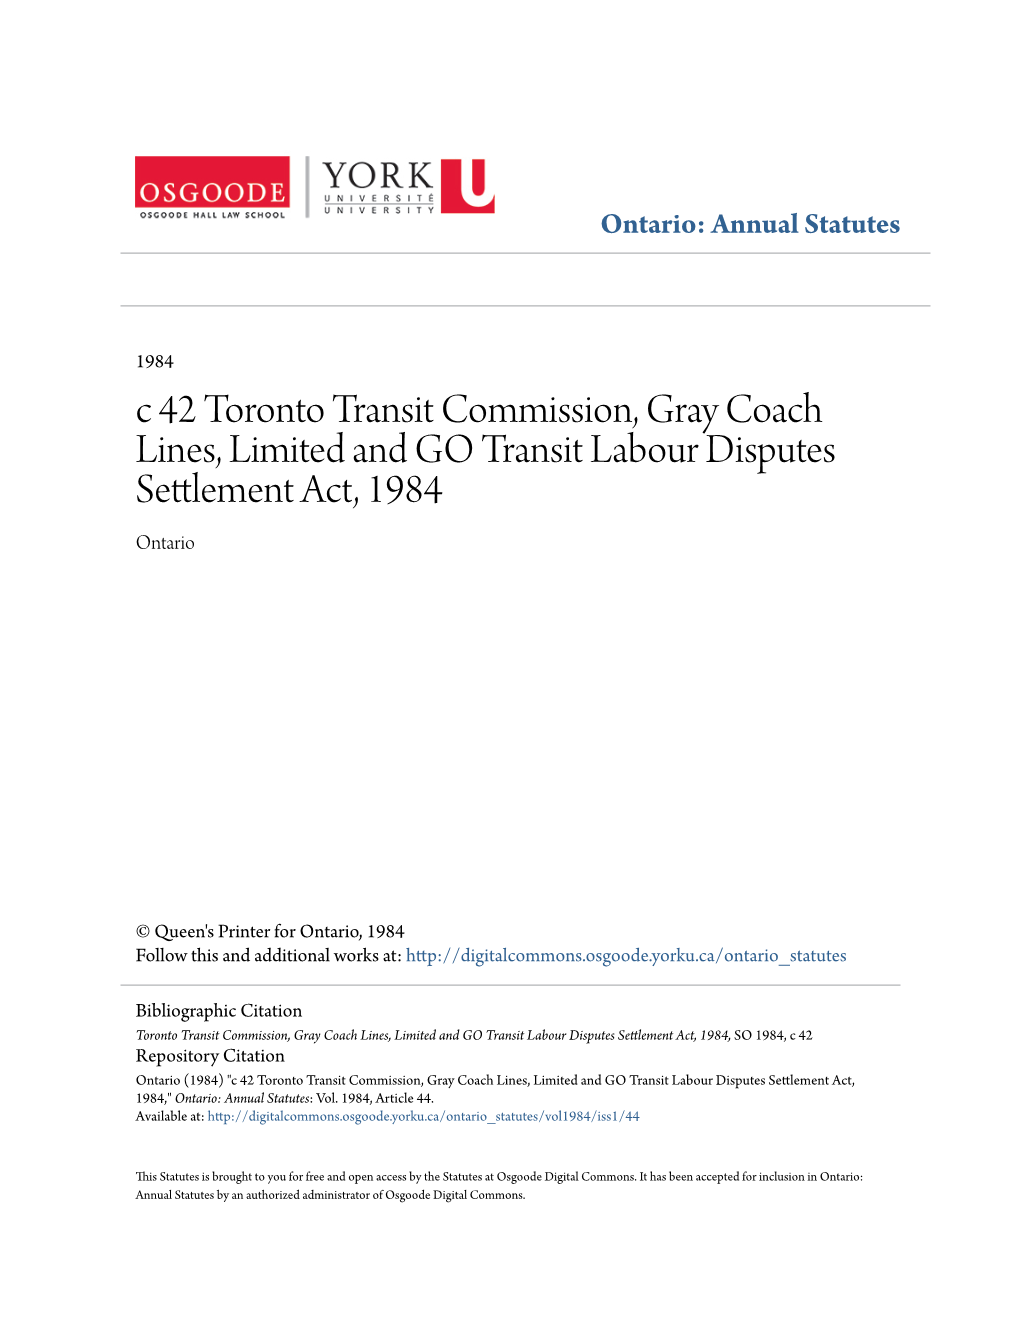 C 42 Toronto Transit Commission, Gray Coach Lines, Limited and GO Transit Labour Disputes Settlement Act, 1984 Ontario